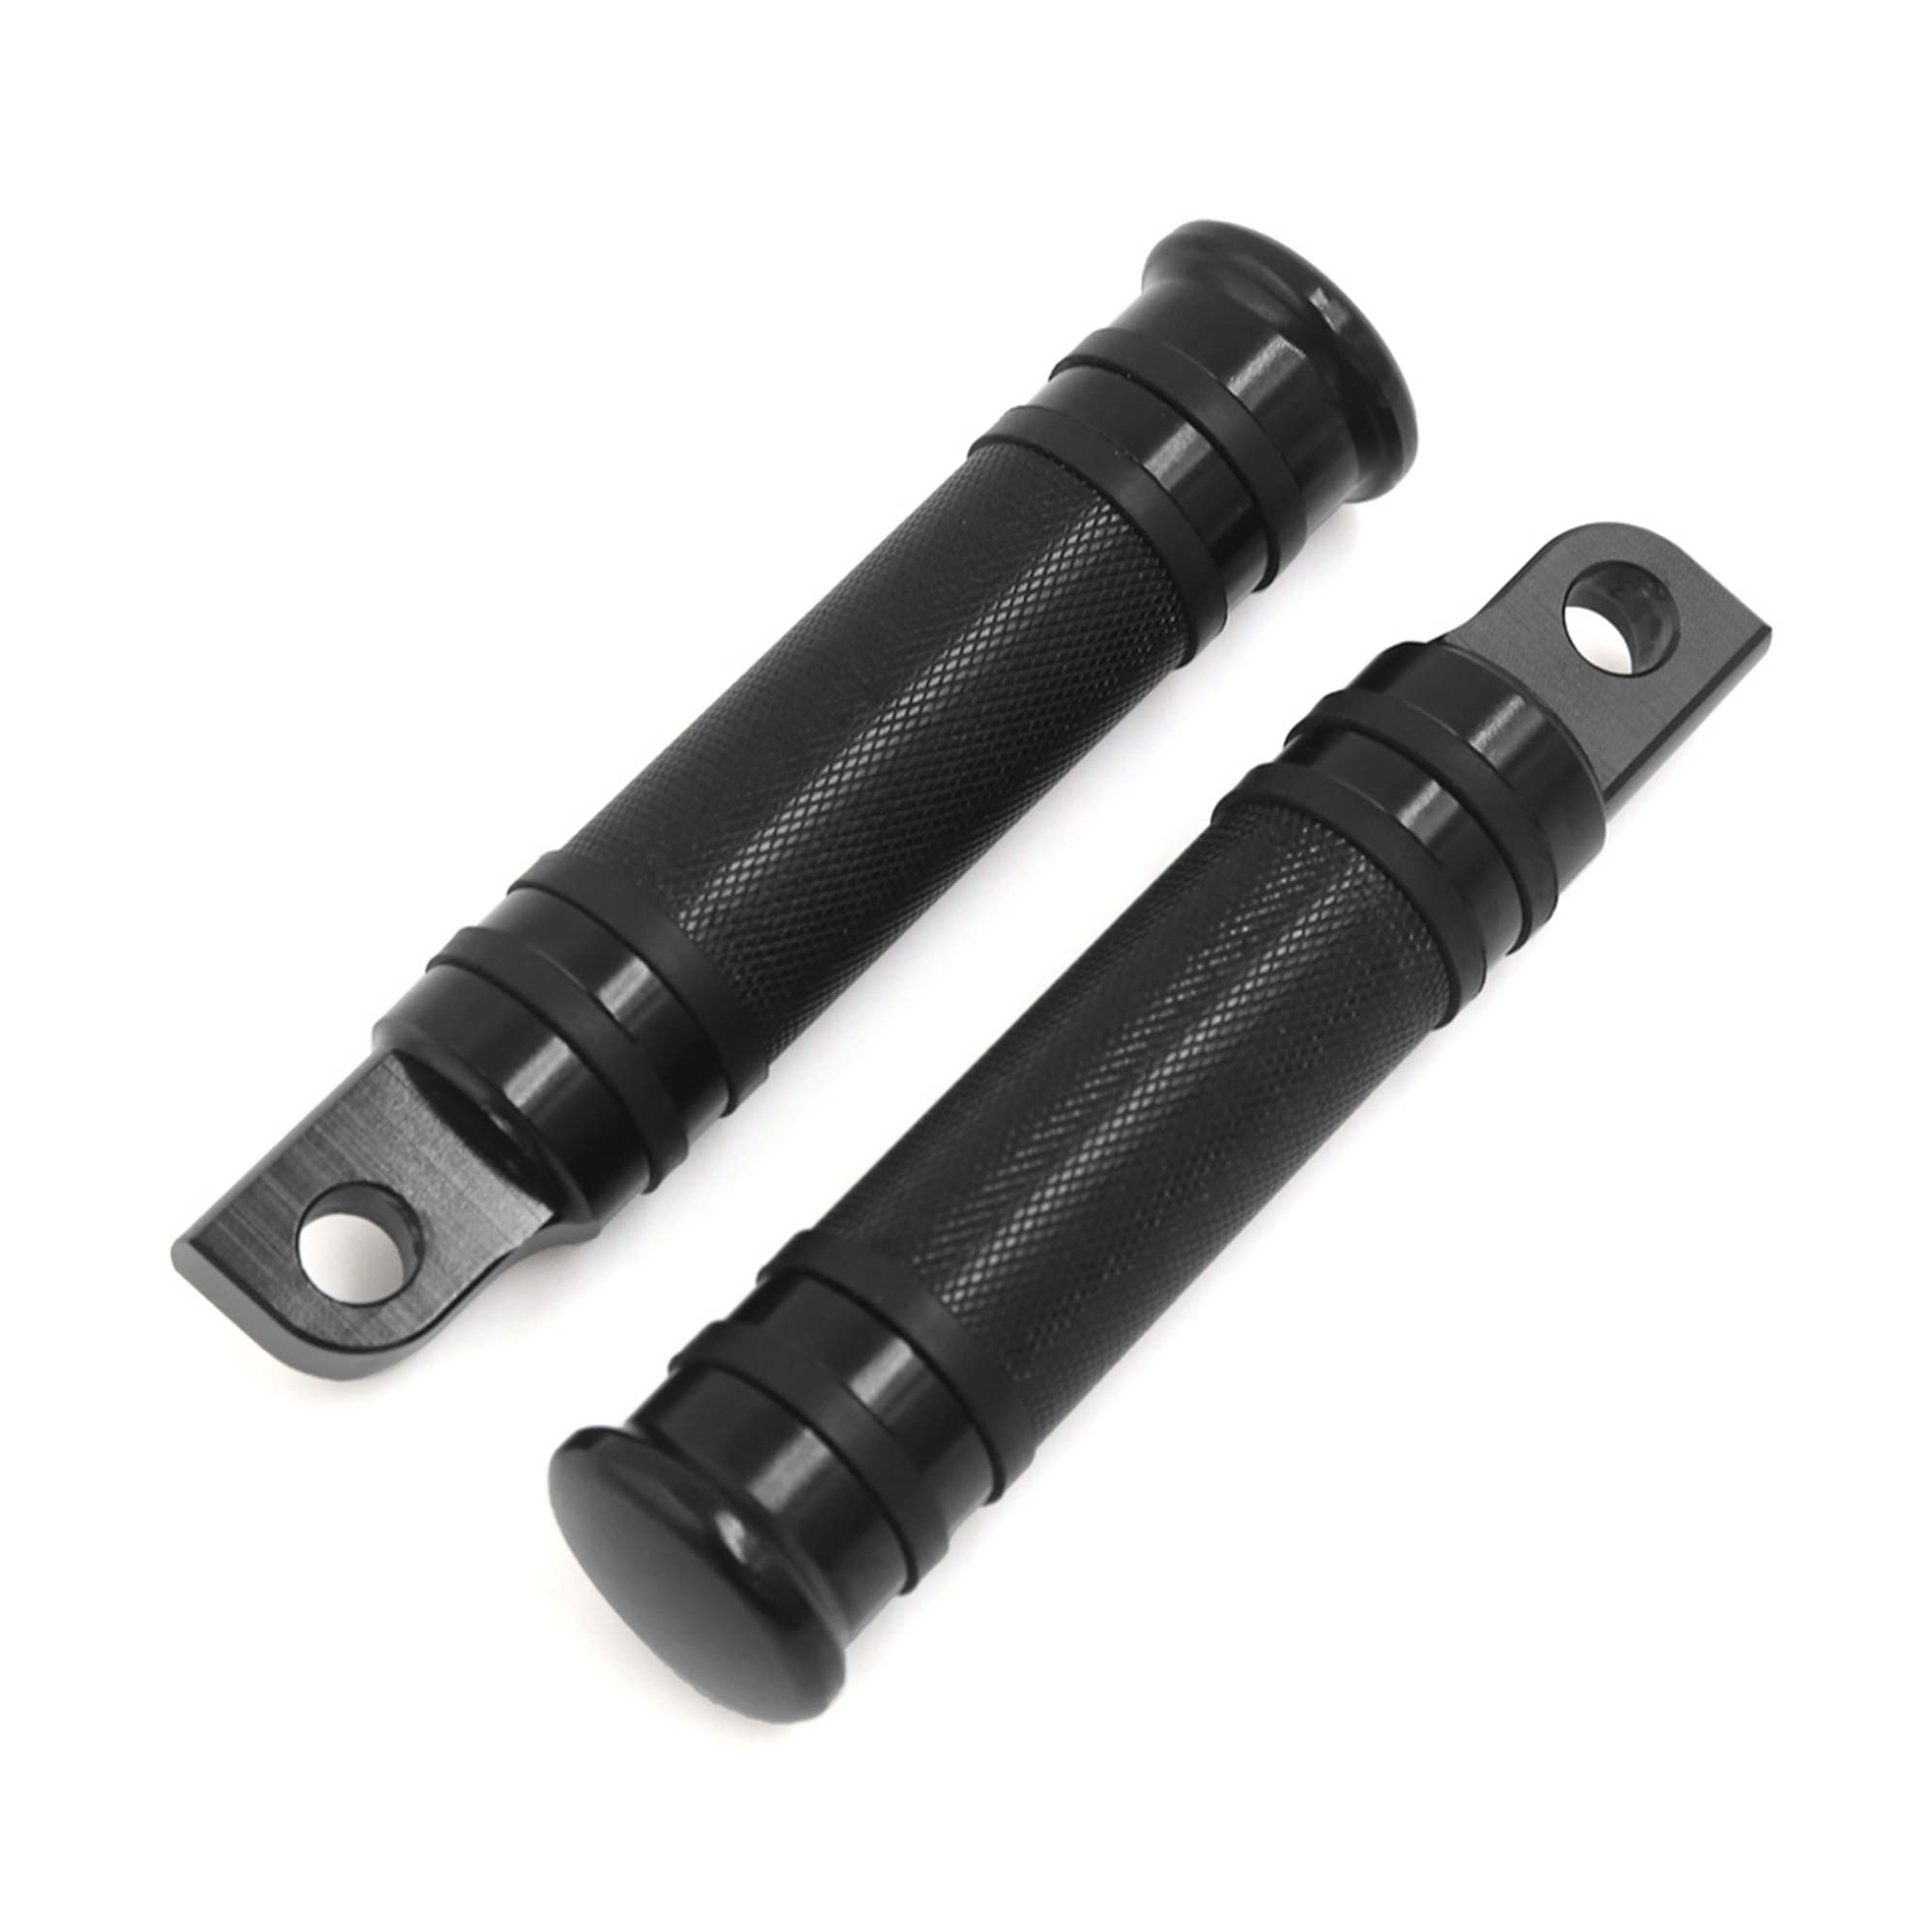 Unique Bargains Black Knurled Narrow Band Male Mount Motorcycle Foot Pegs For Harley Davidson